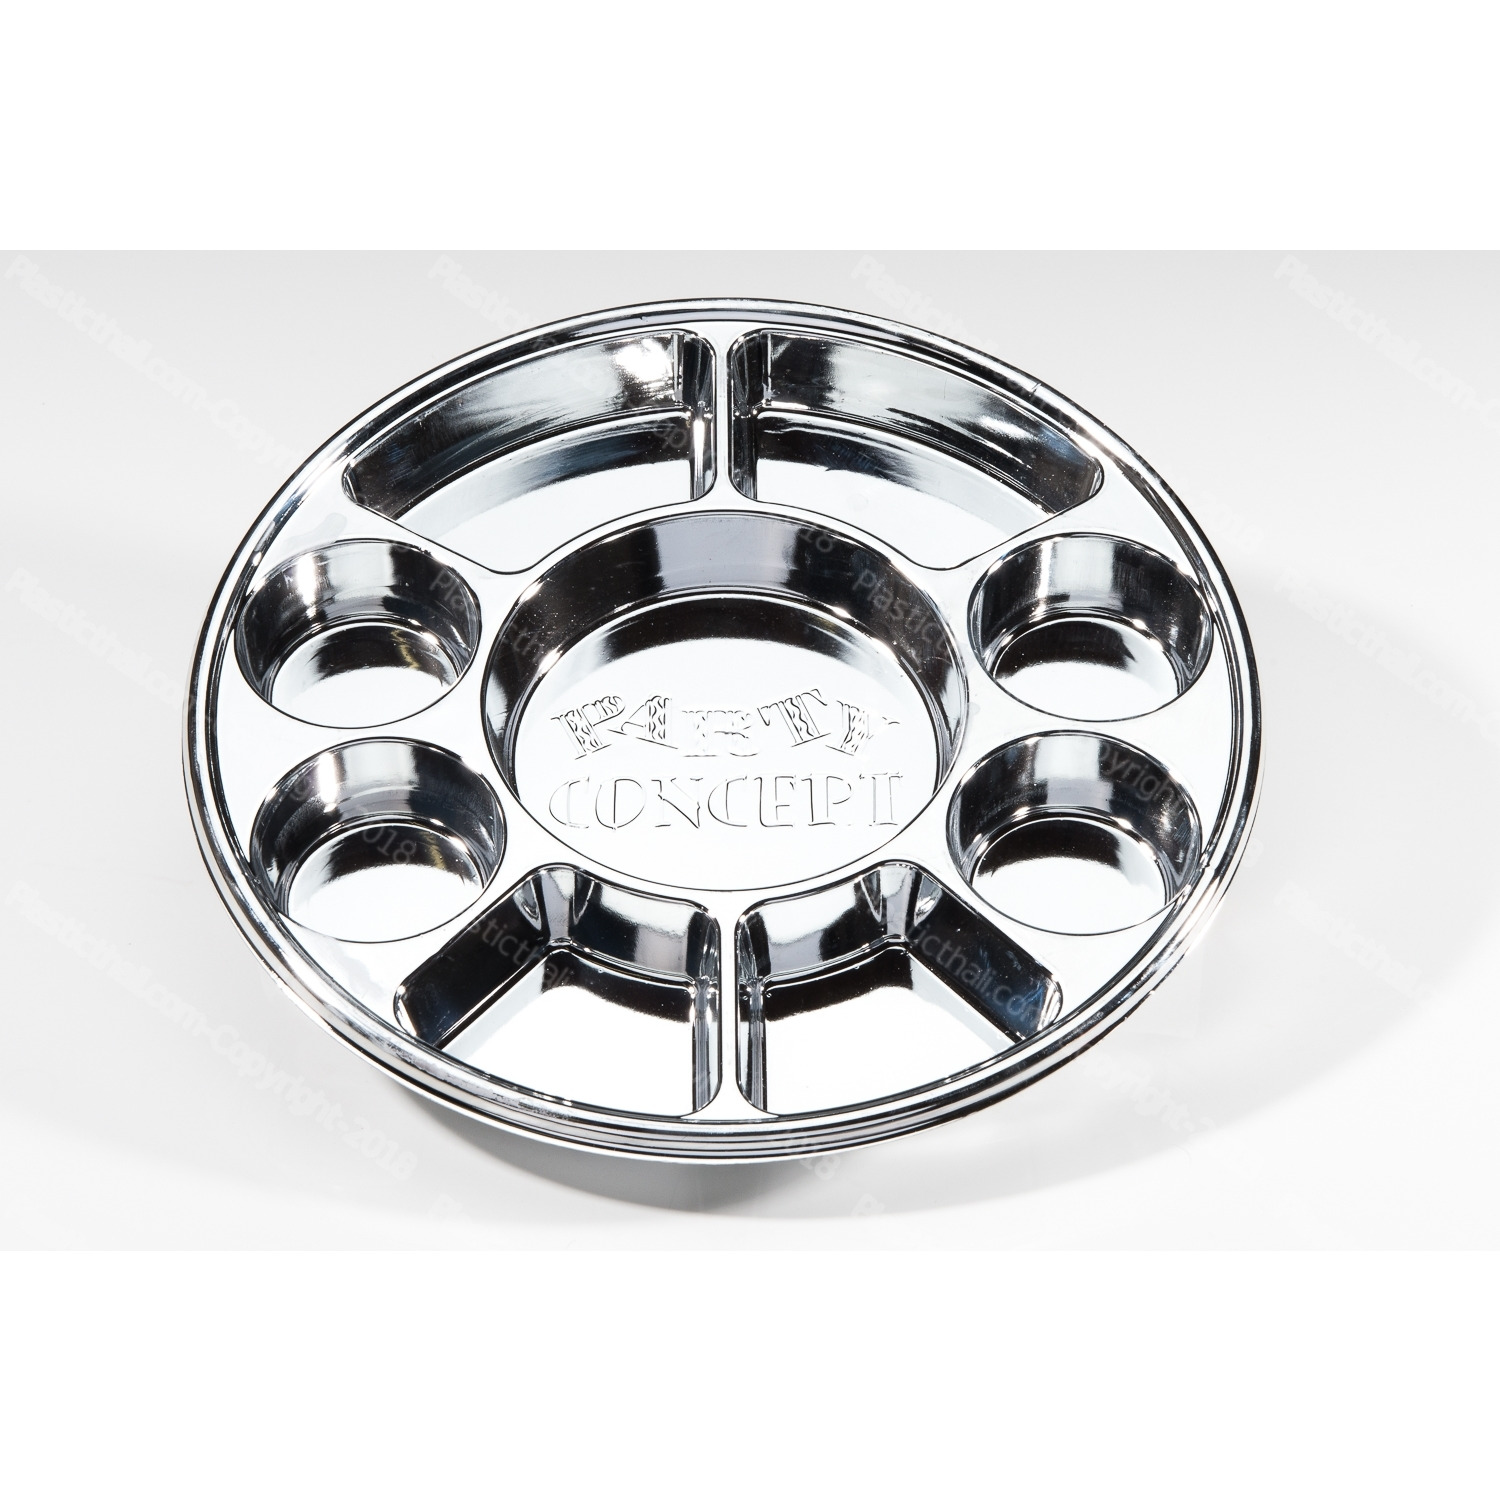 Metallic Silver 9 Compartment Plate-50 plates per pack